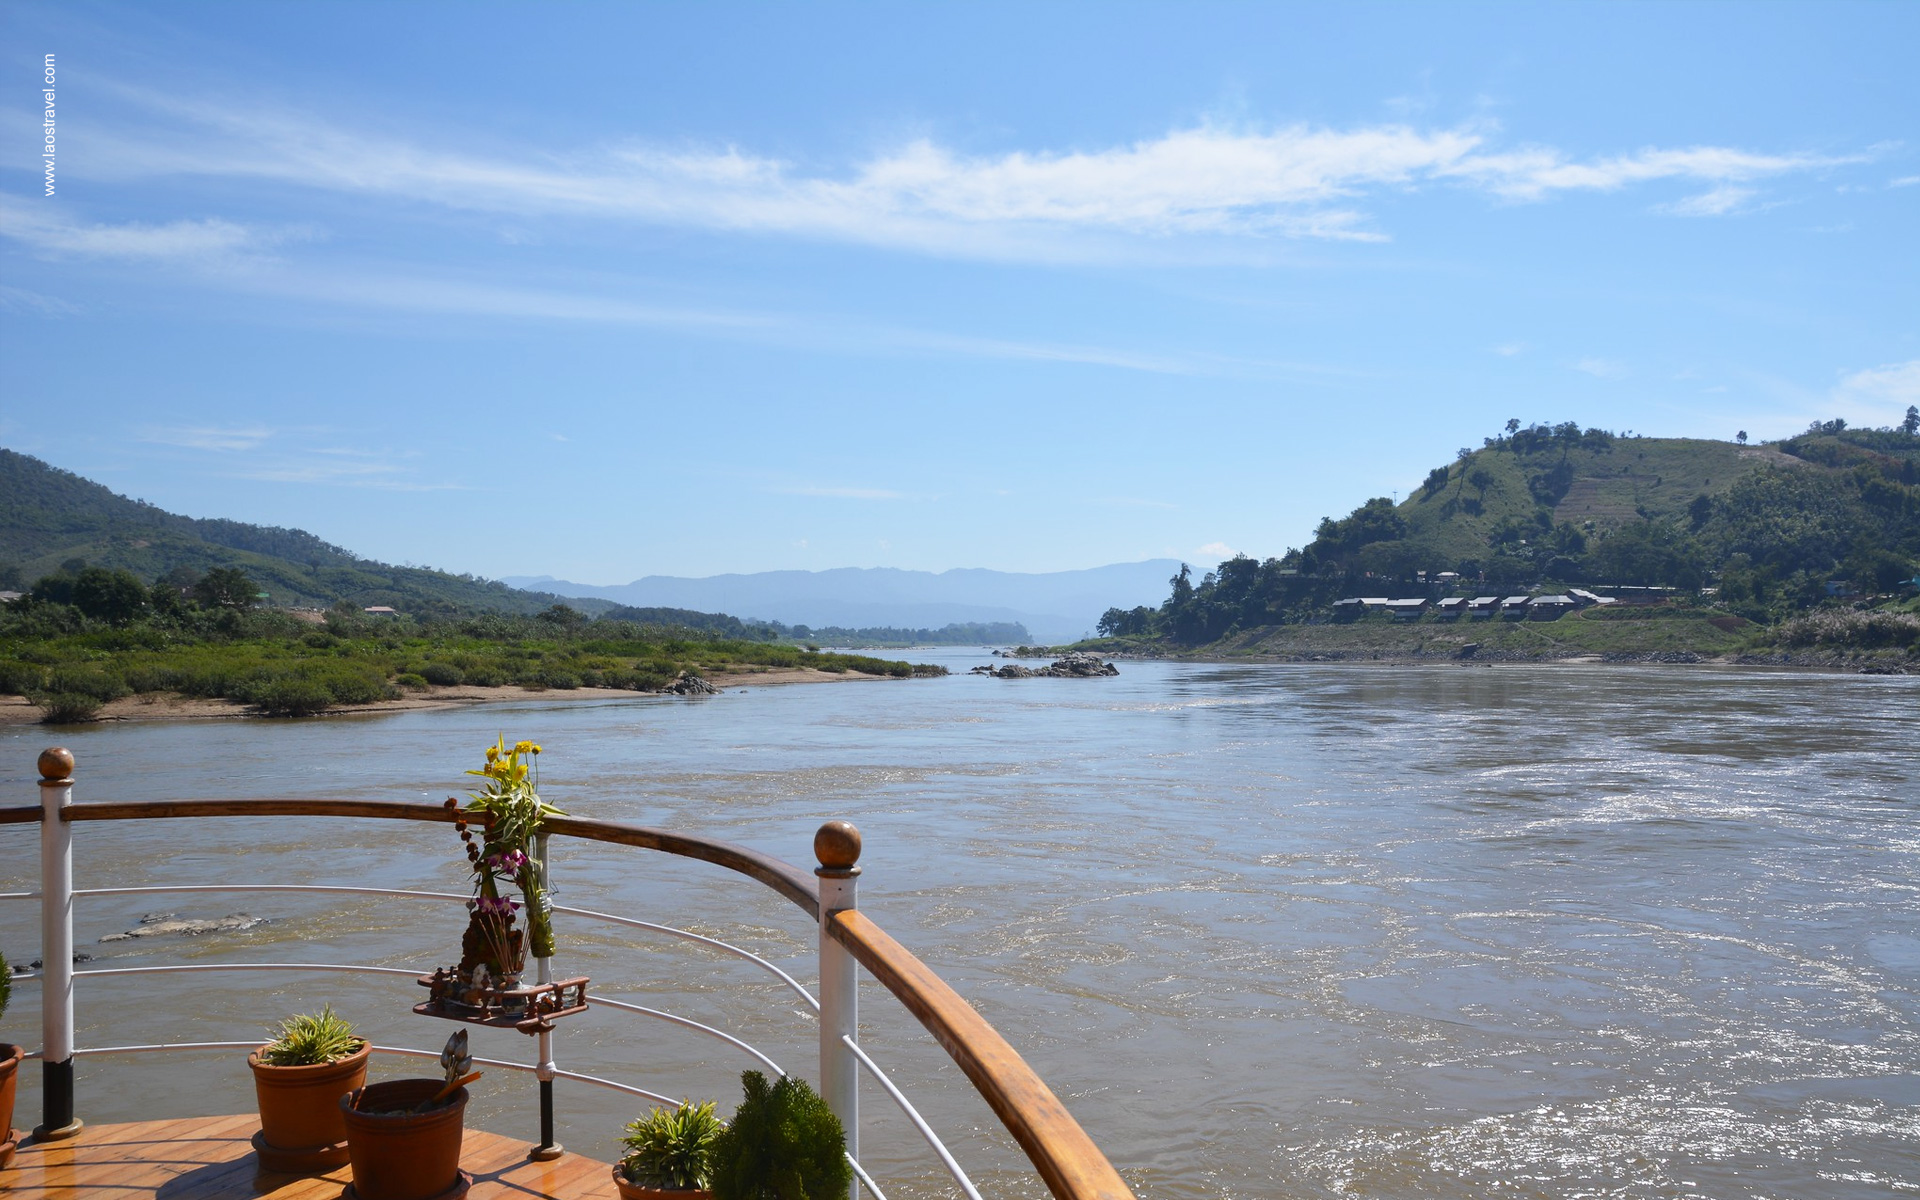 Boat trip on Mekong river with stunning view of surrounding mountains